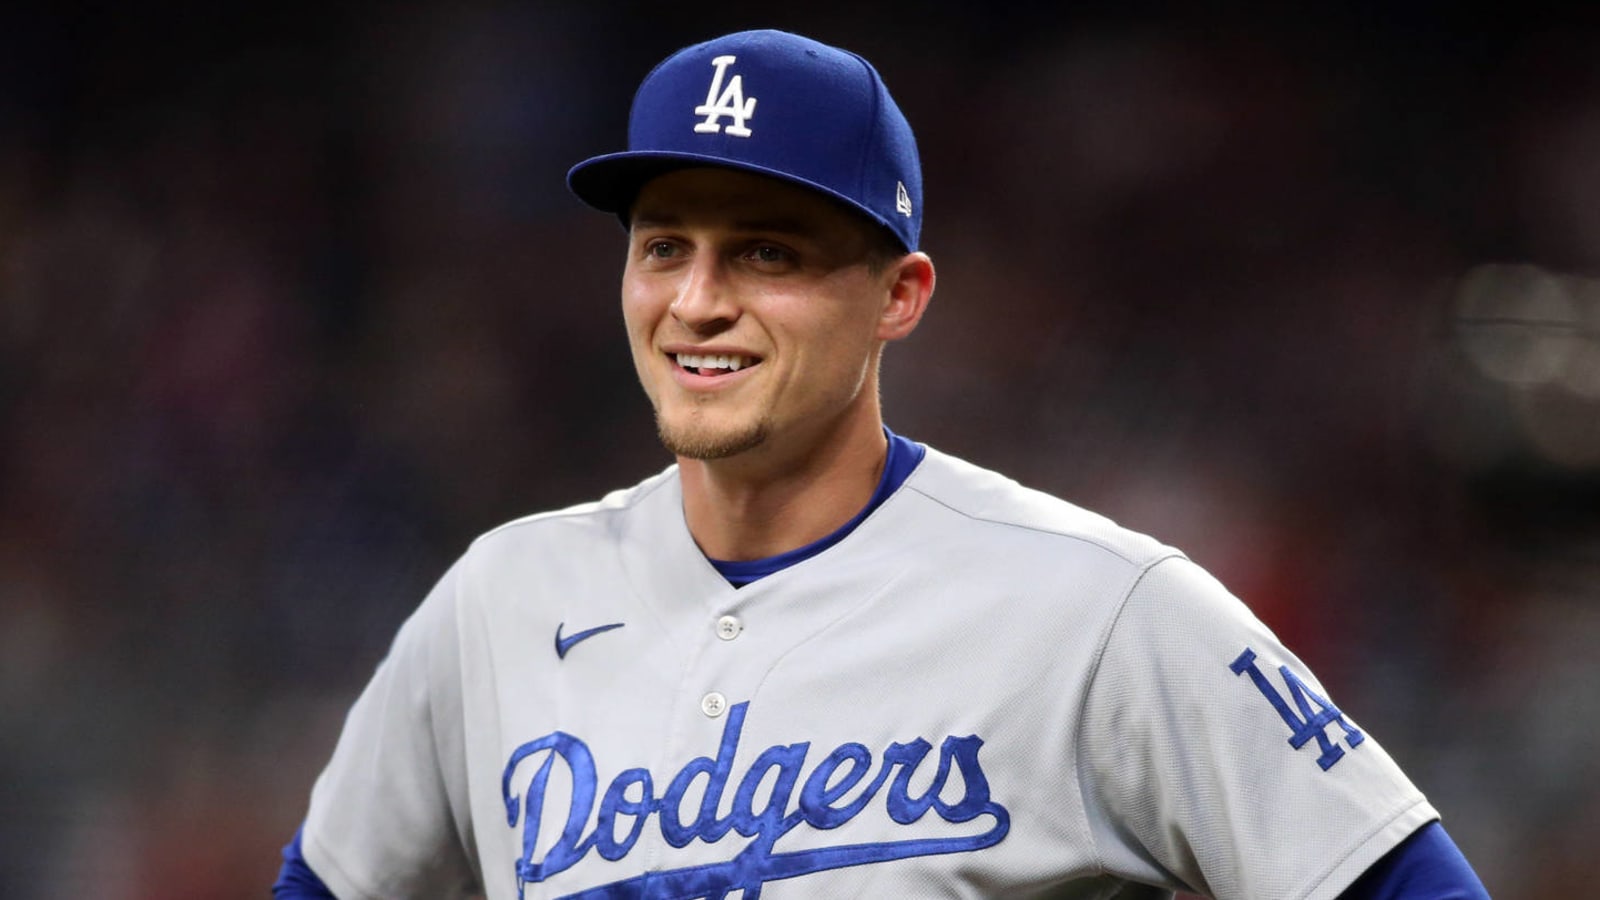 Rangers land Corey Seager with blockbuster 10-year, $325M deal